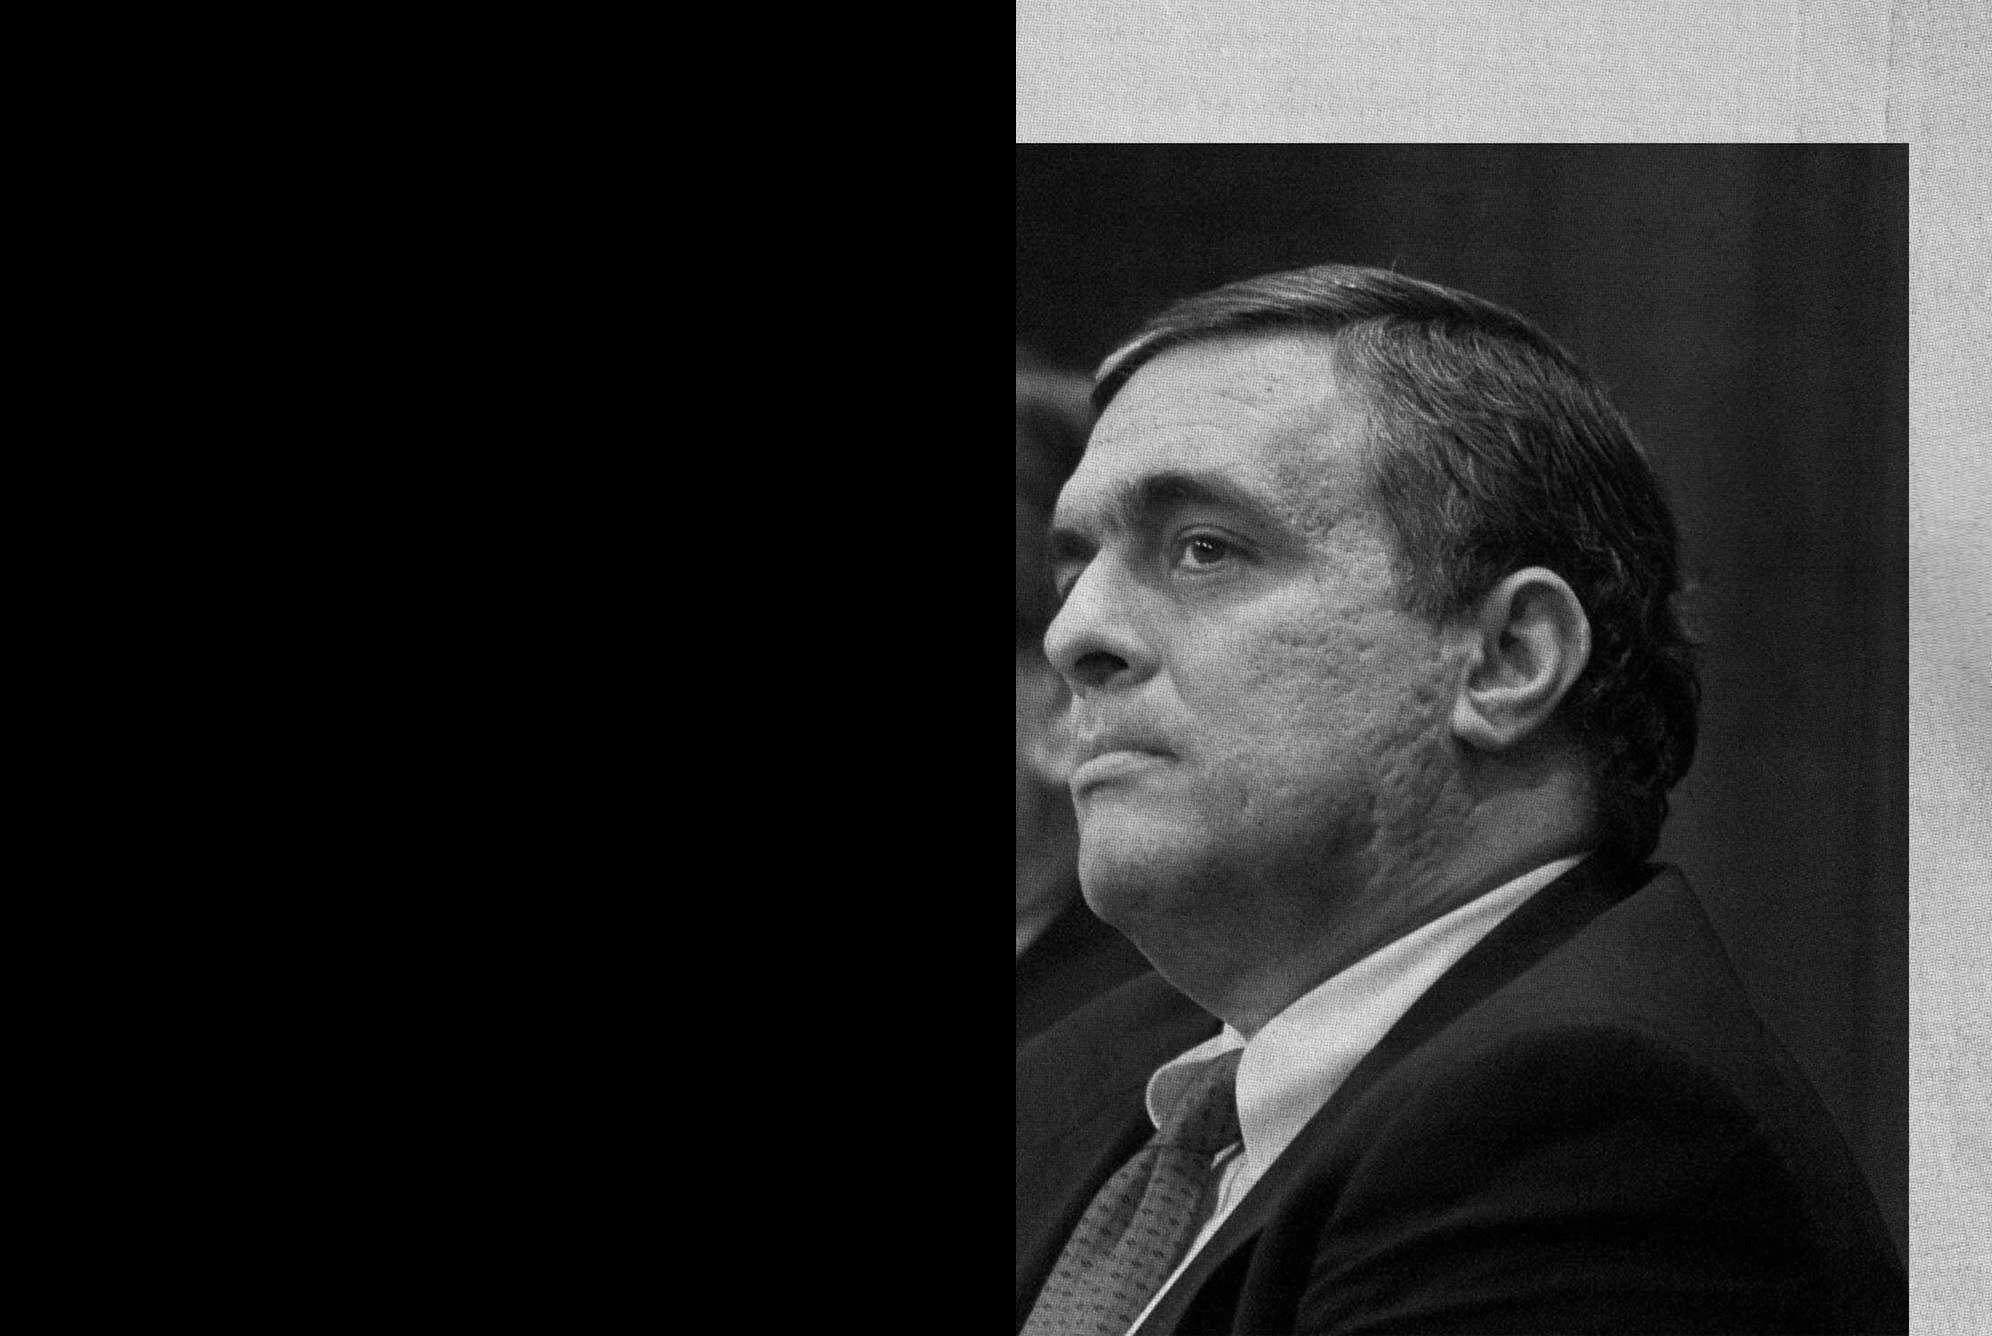 CIA Director George Tenet, right, accompanied by Attorney General John Ashcroft, looks on as FBI Director Louis Freeh, not shown, meets reporters at FBI headquarters in Washington Tuesday, Feb. 20, 2001 to discuss the arrest the FBI Agent Robert Philip Hanssen. (AP Photo/Rick Bowmer)